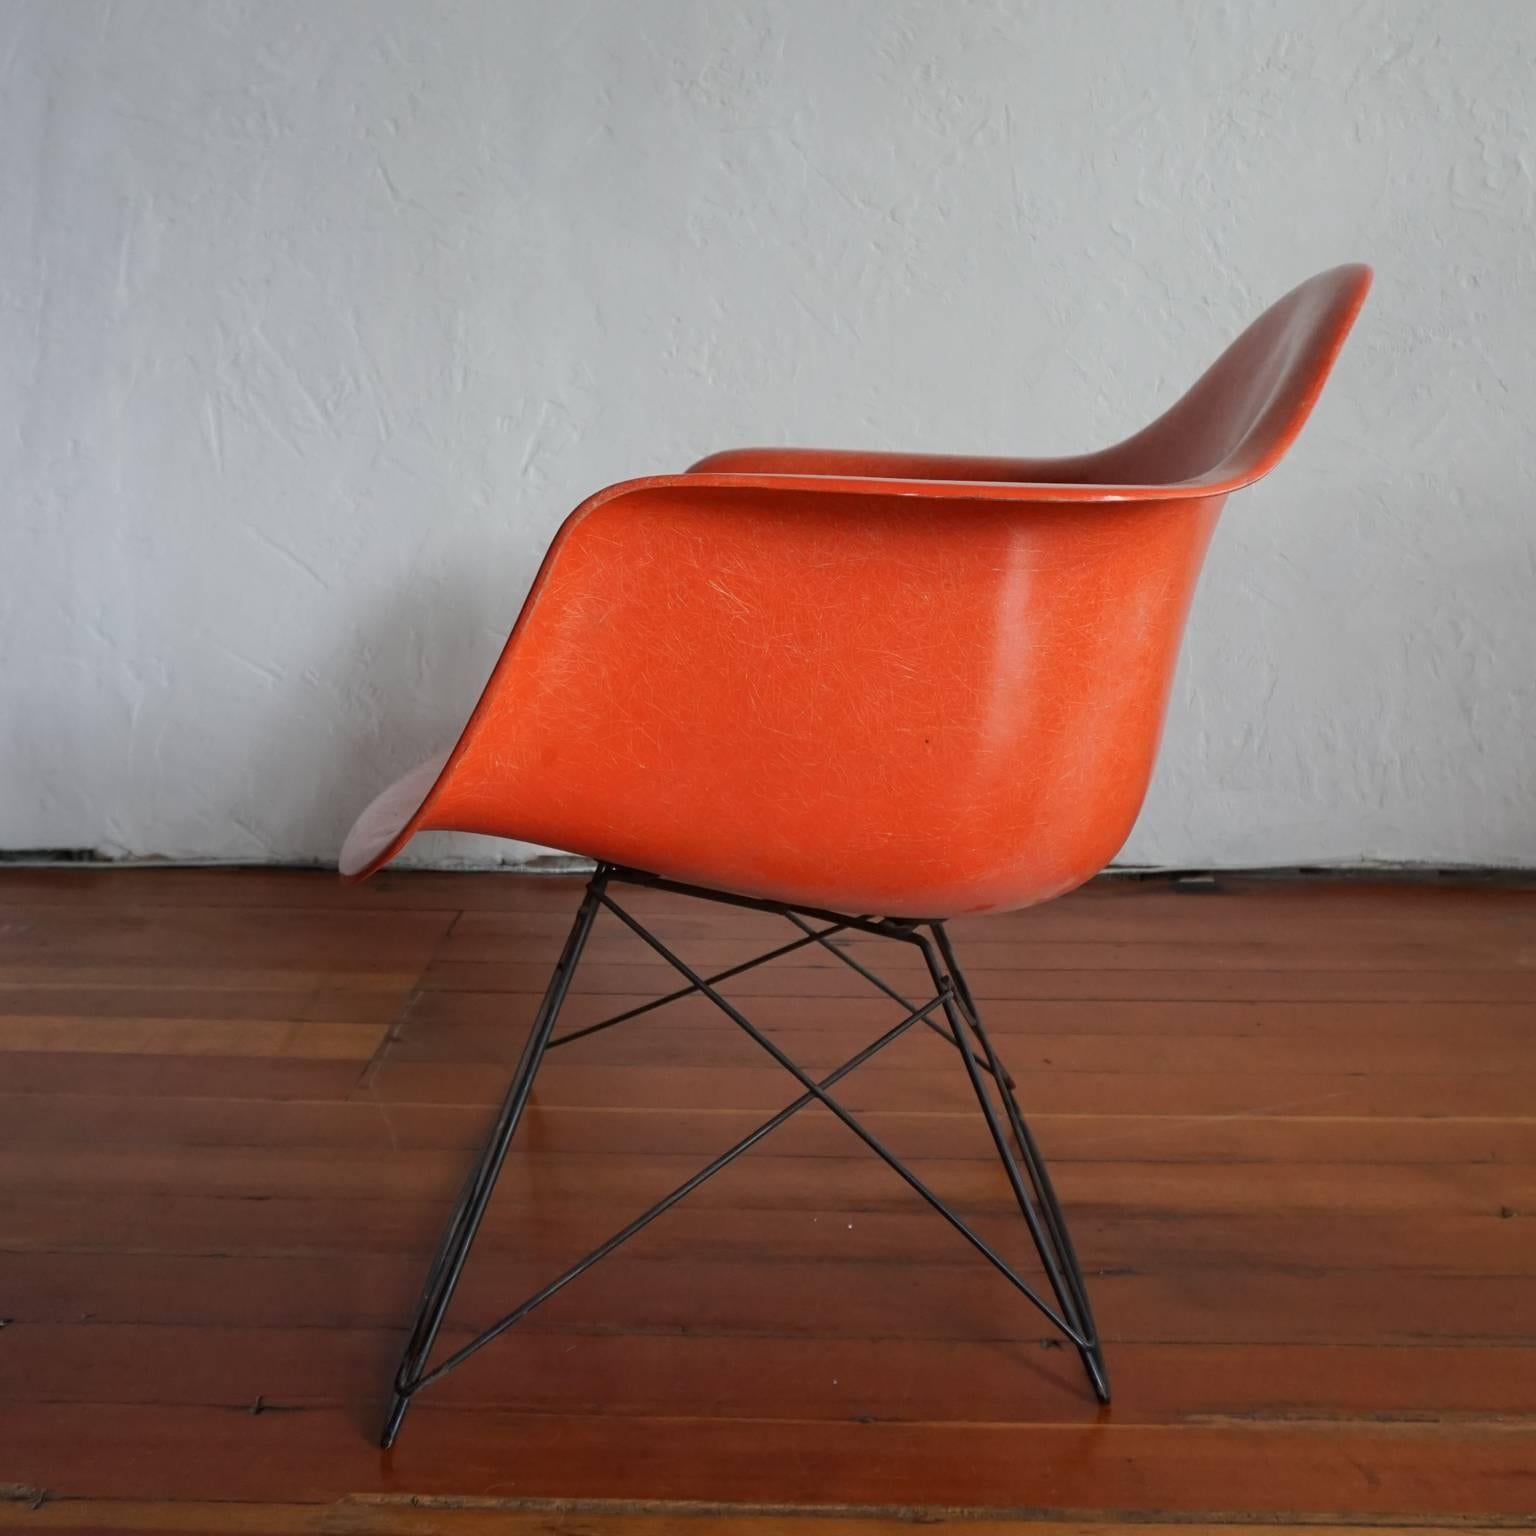 All original vintage fiberglass LAR by Charles and Ray Eames for Herman Miller, 1950s. The color is a red-orange.